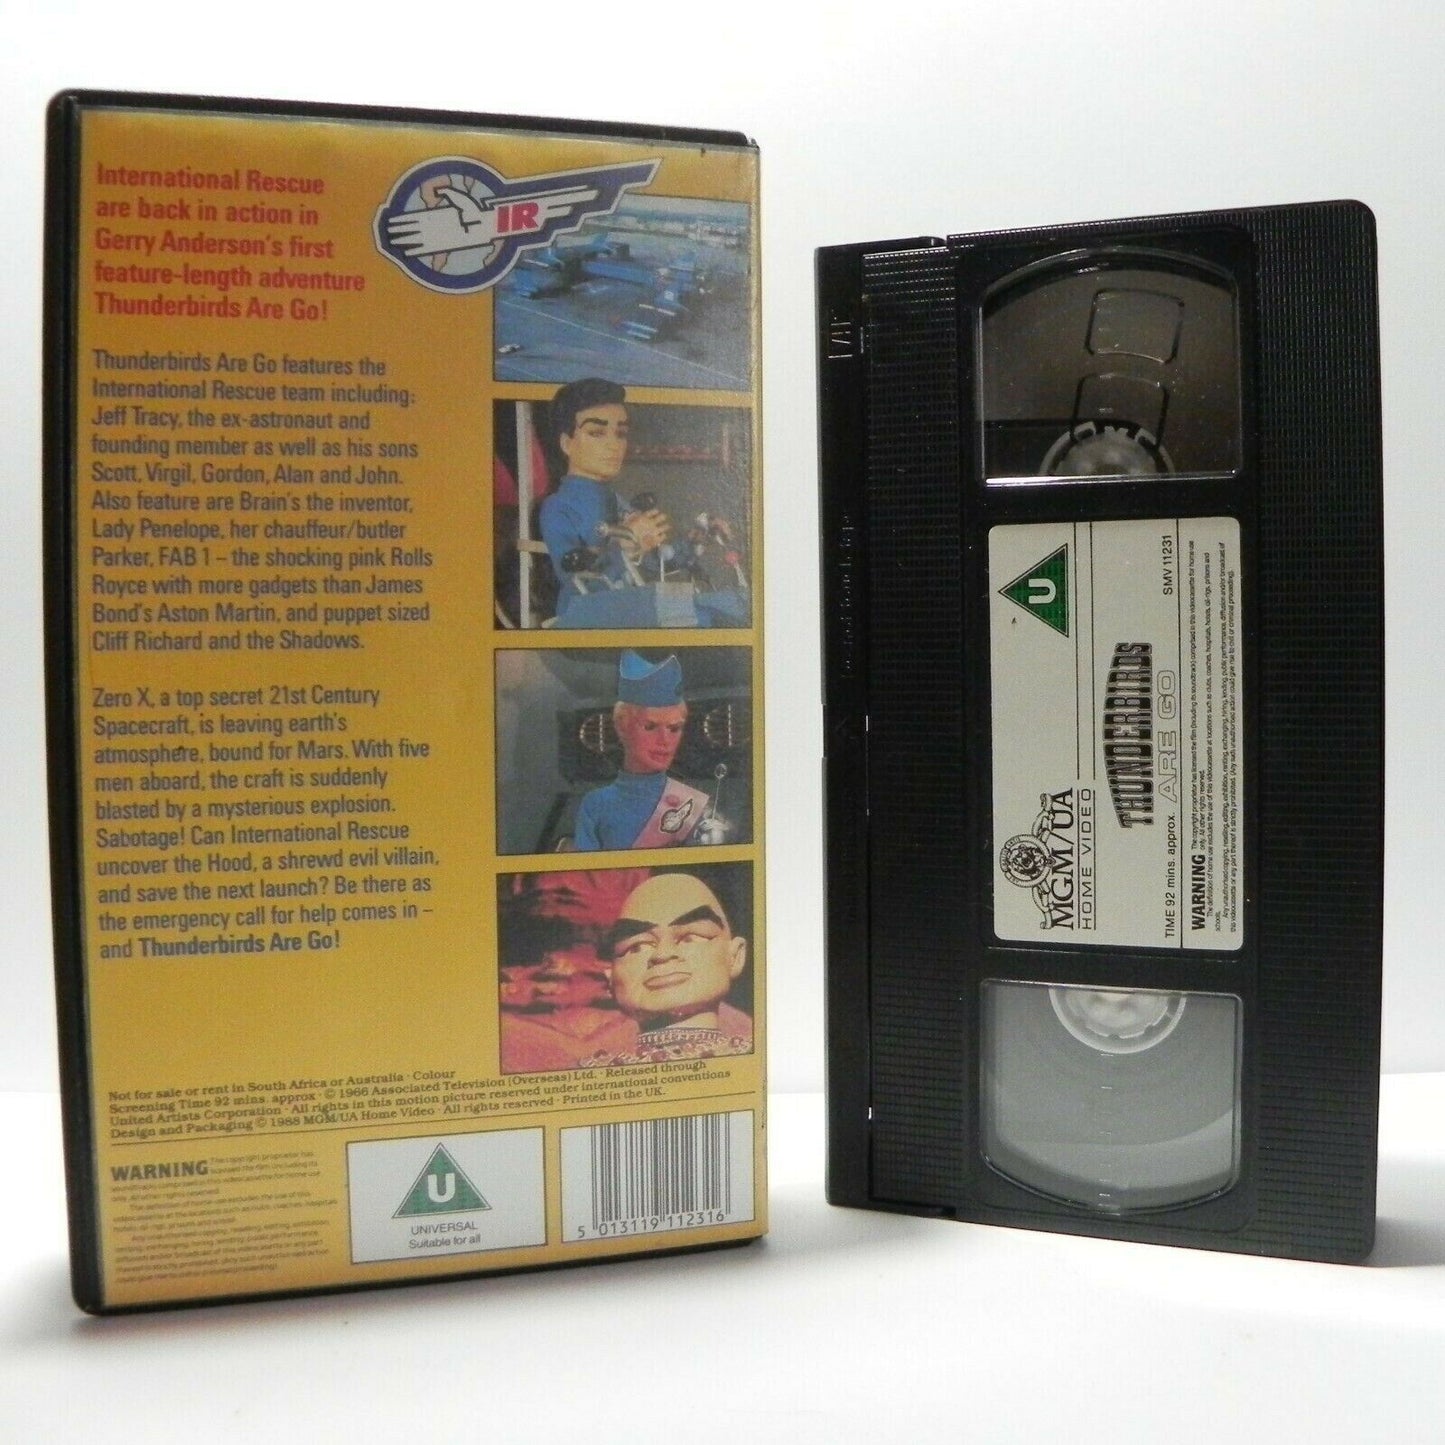 Thunderbirds Are Go: The Movie - Animated - Action Adventure - Children's - VHS-